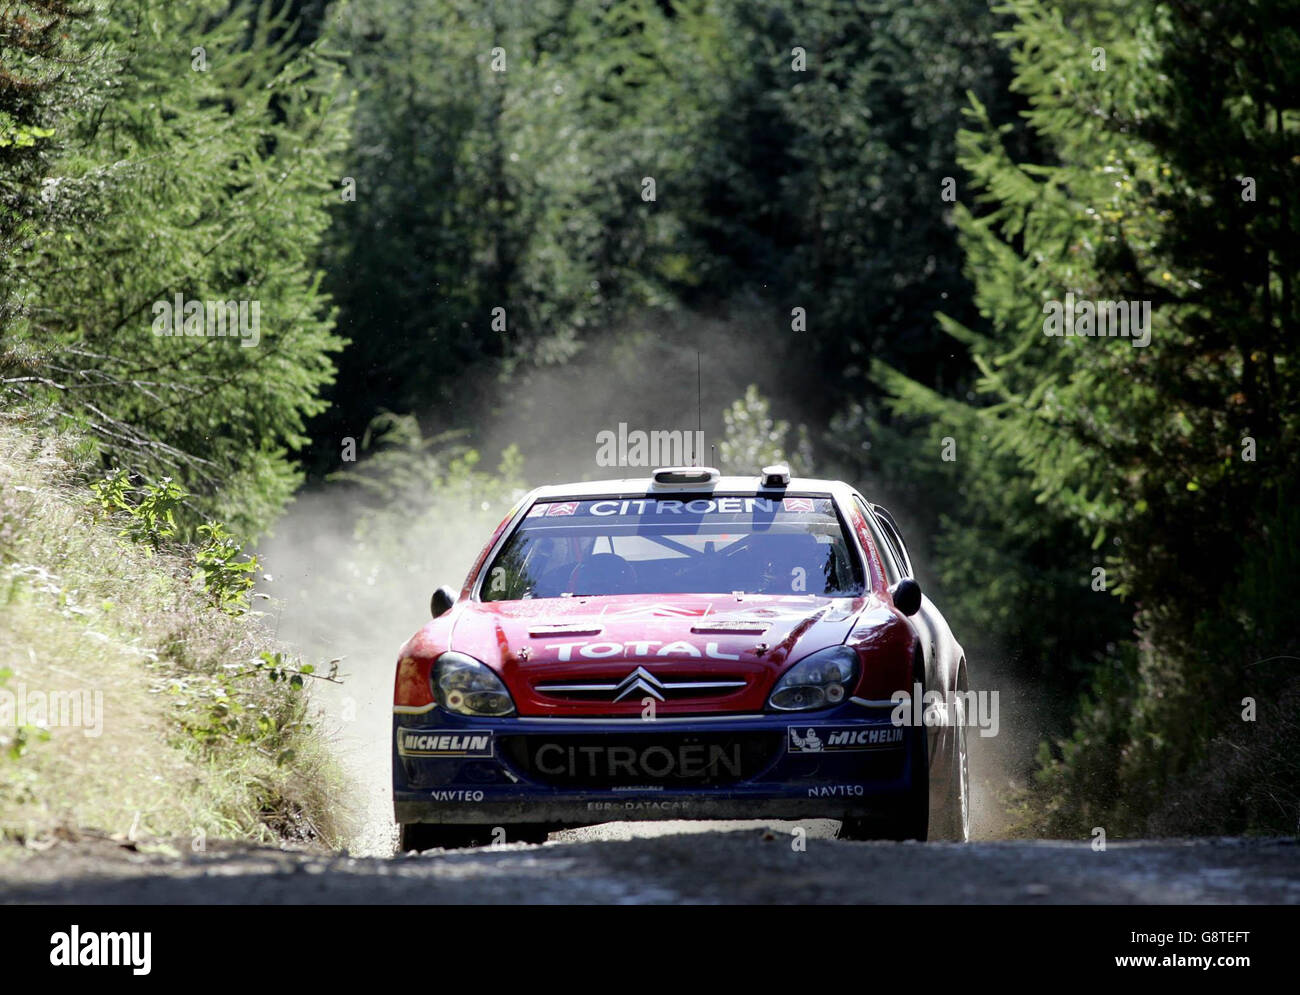 France's Sebastien Loeb in his Citroen Xsara during the Trawscoed stage of the Wales Rally GB in Brechfa, Wales, Friday September 16, 2005. PRESS ASSOCIATION Photo. Photo credit should read: David Davies/PA. Stock Photo